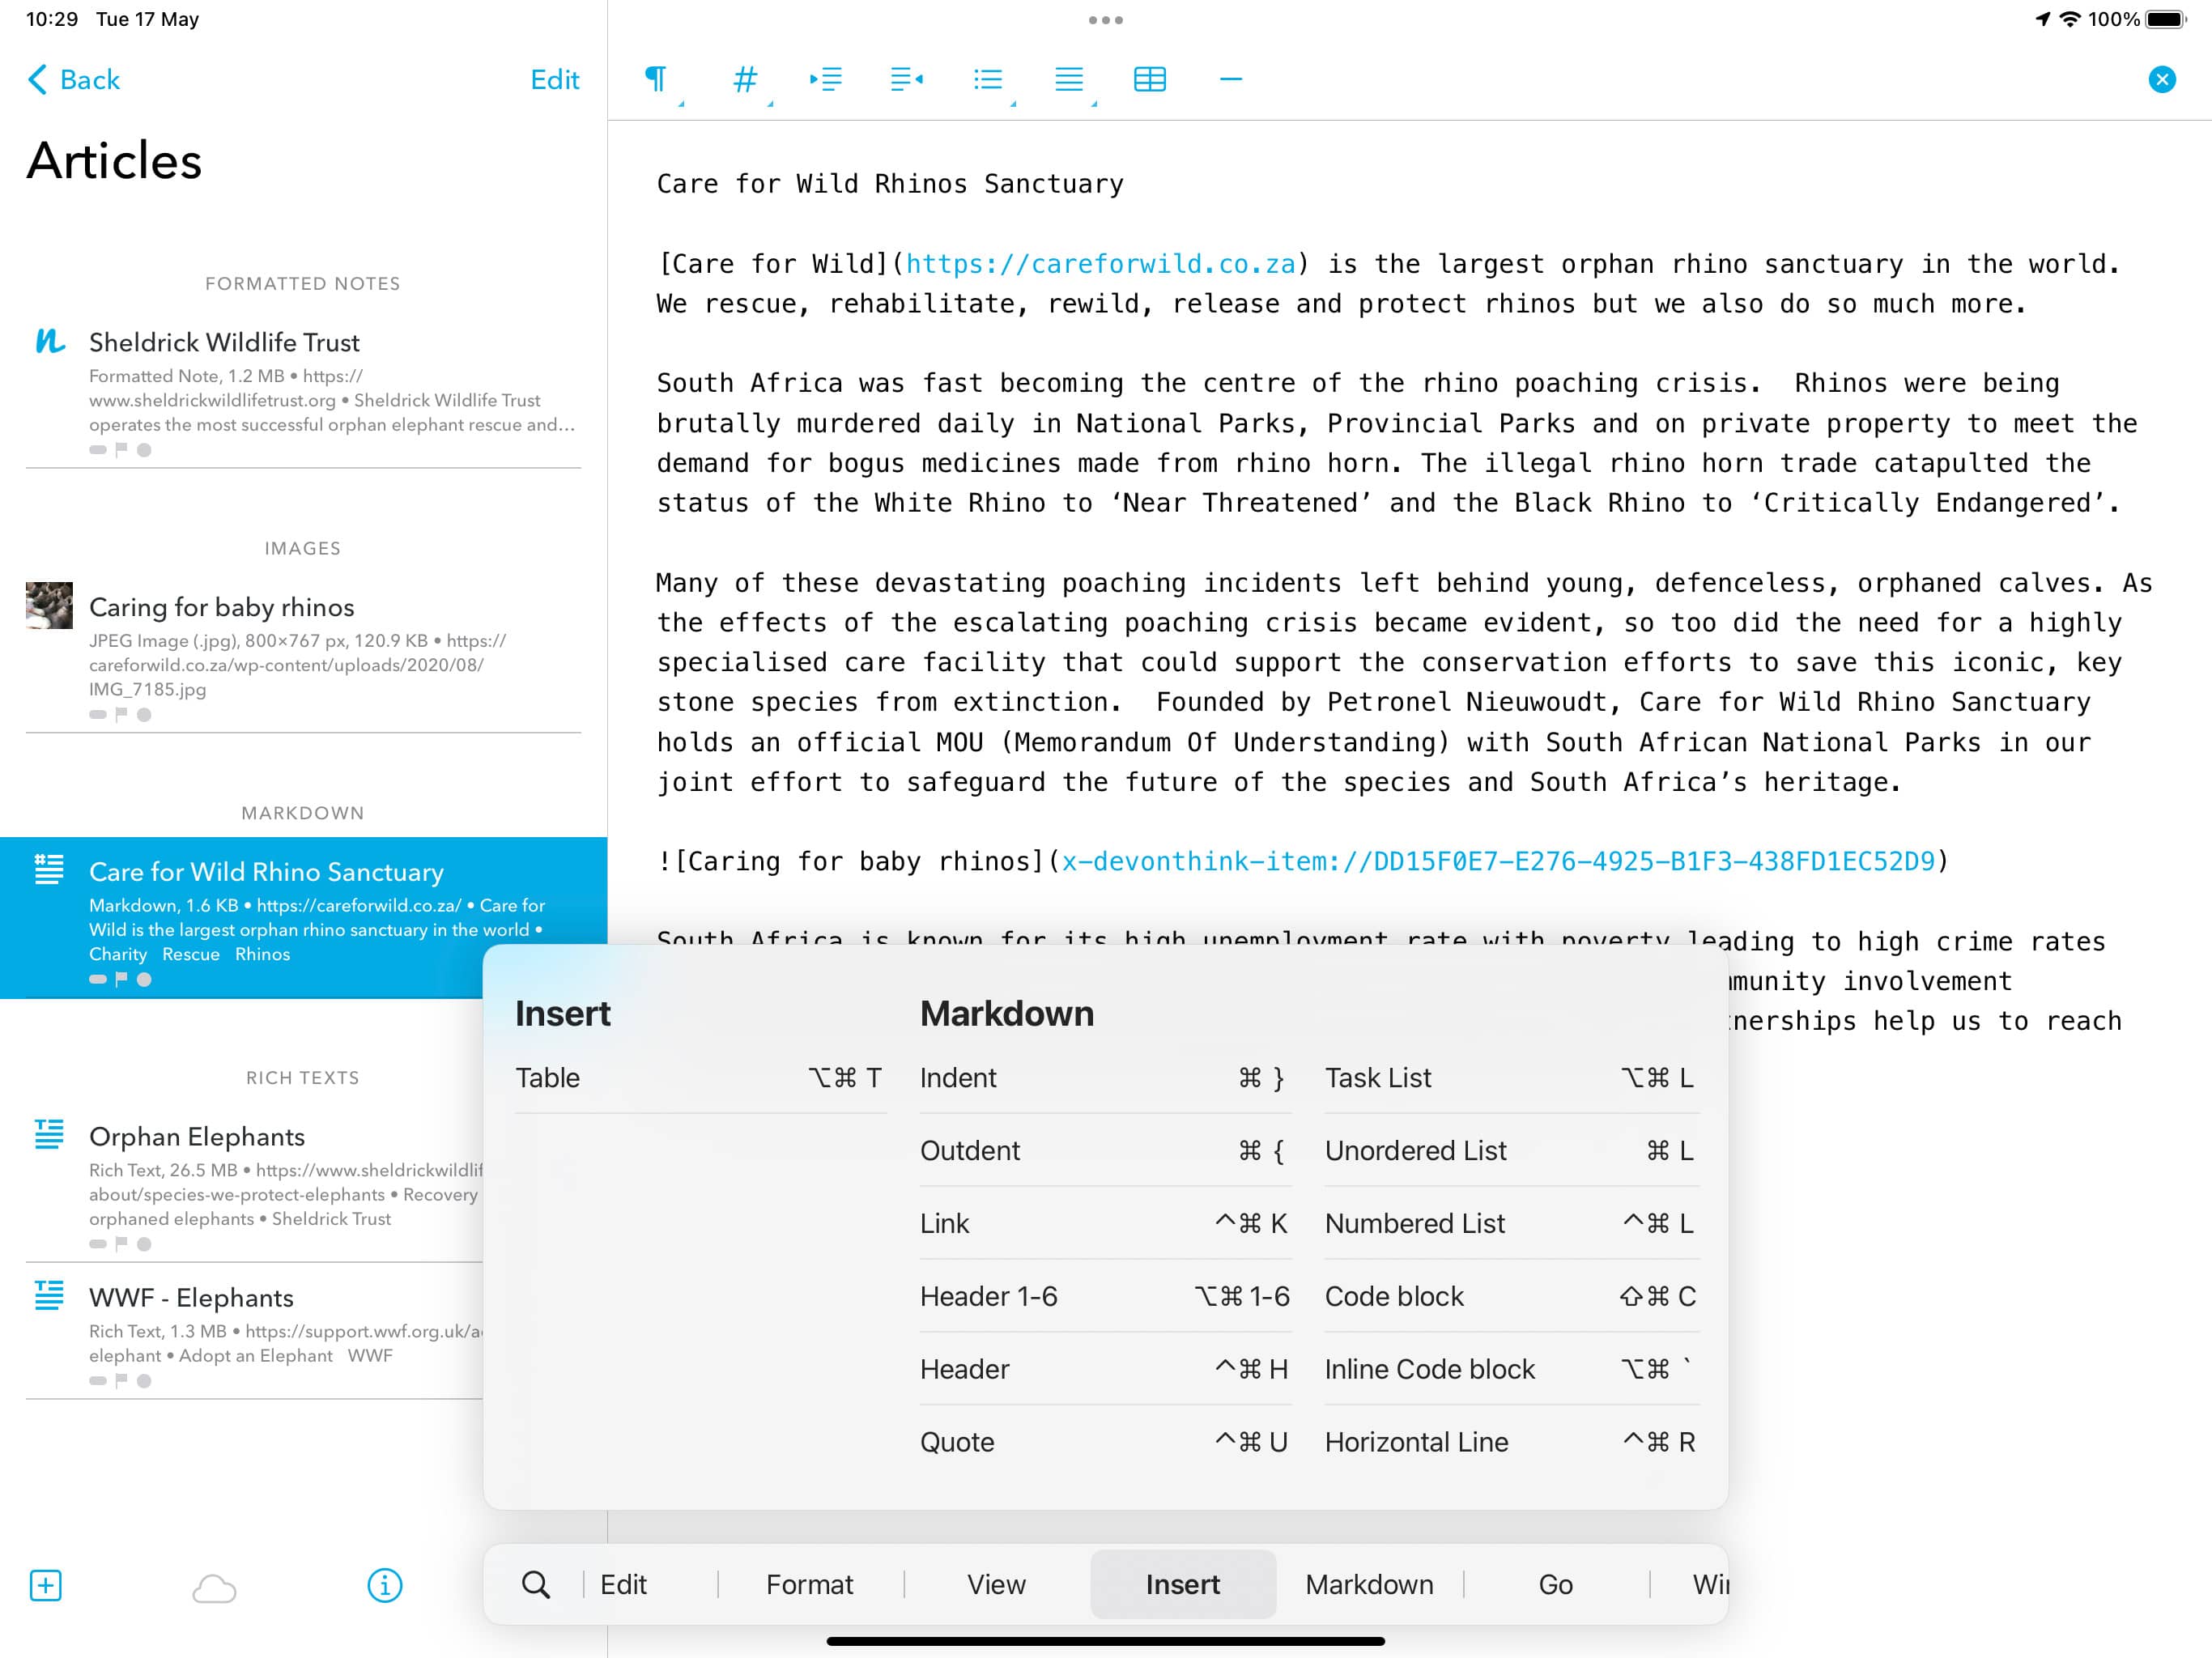 Screenshot of DEVONthink To Go text editor with Markdown and the key commands overlay.